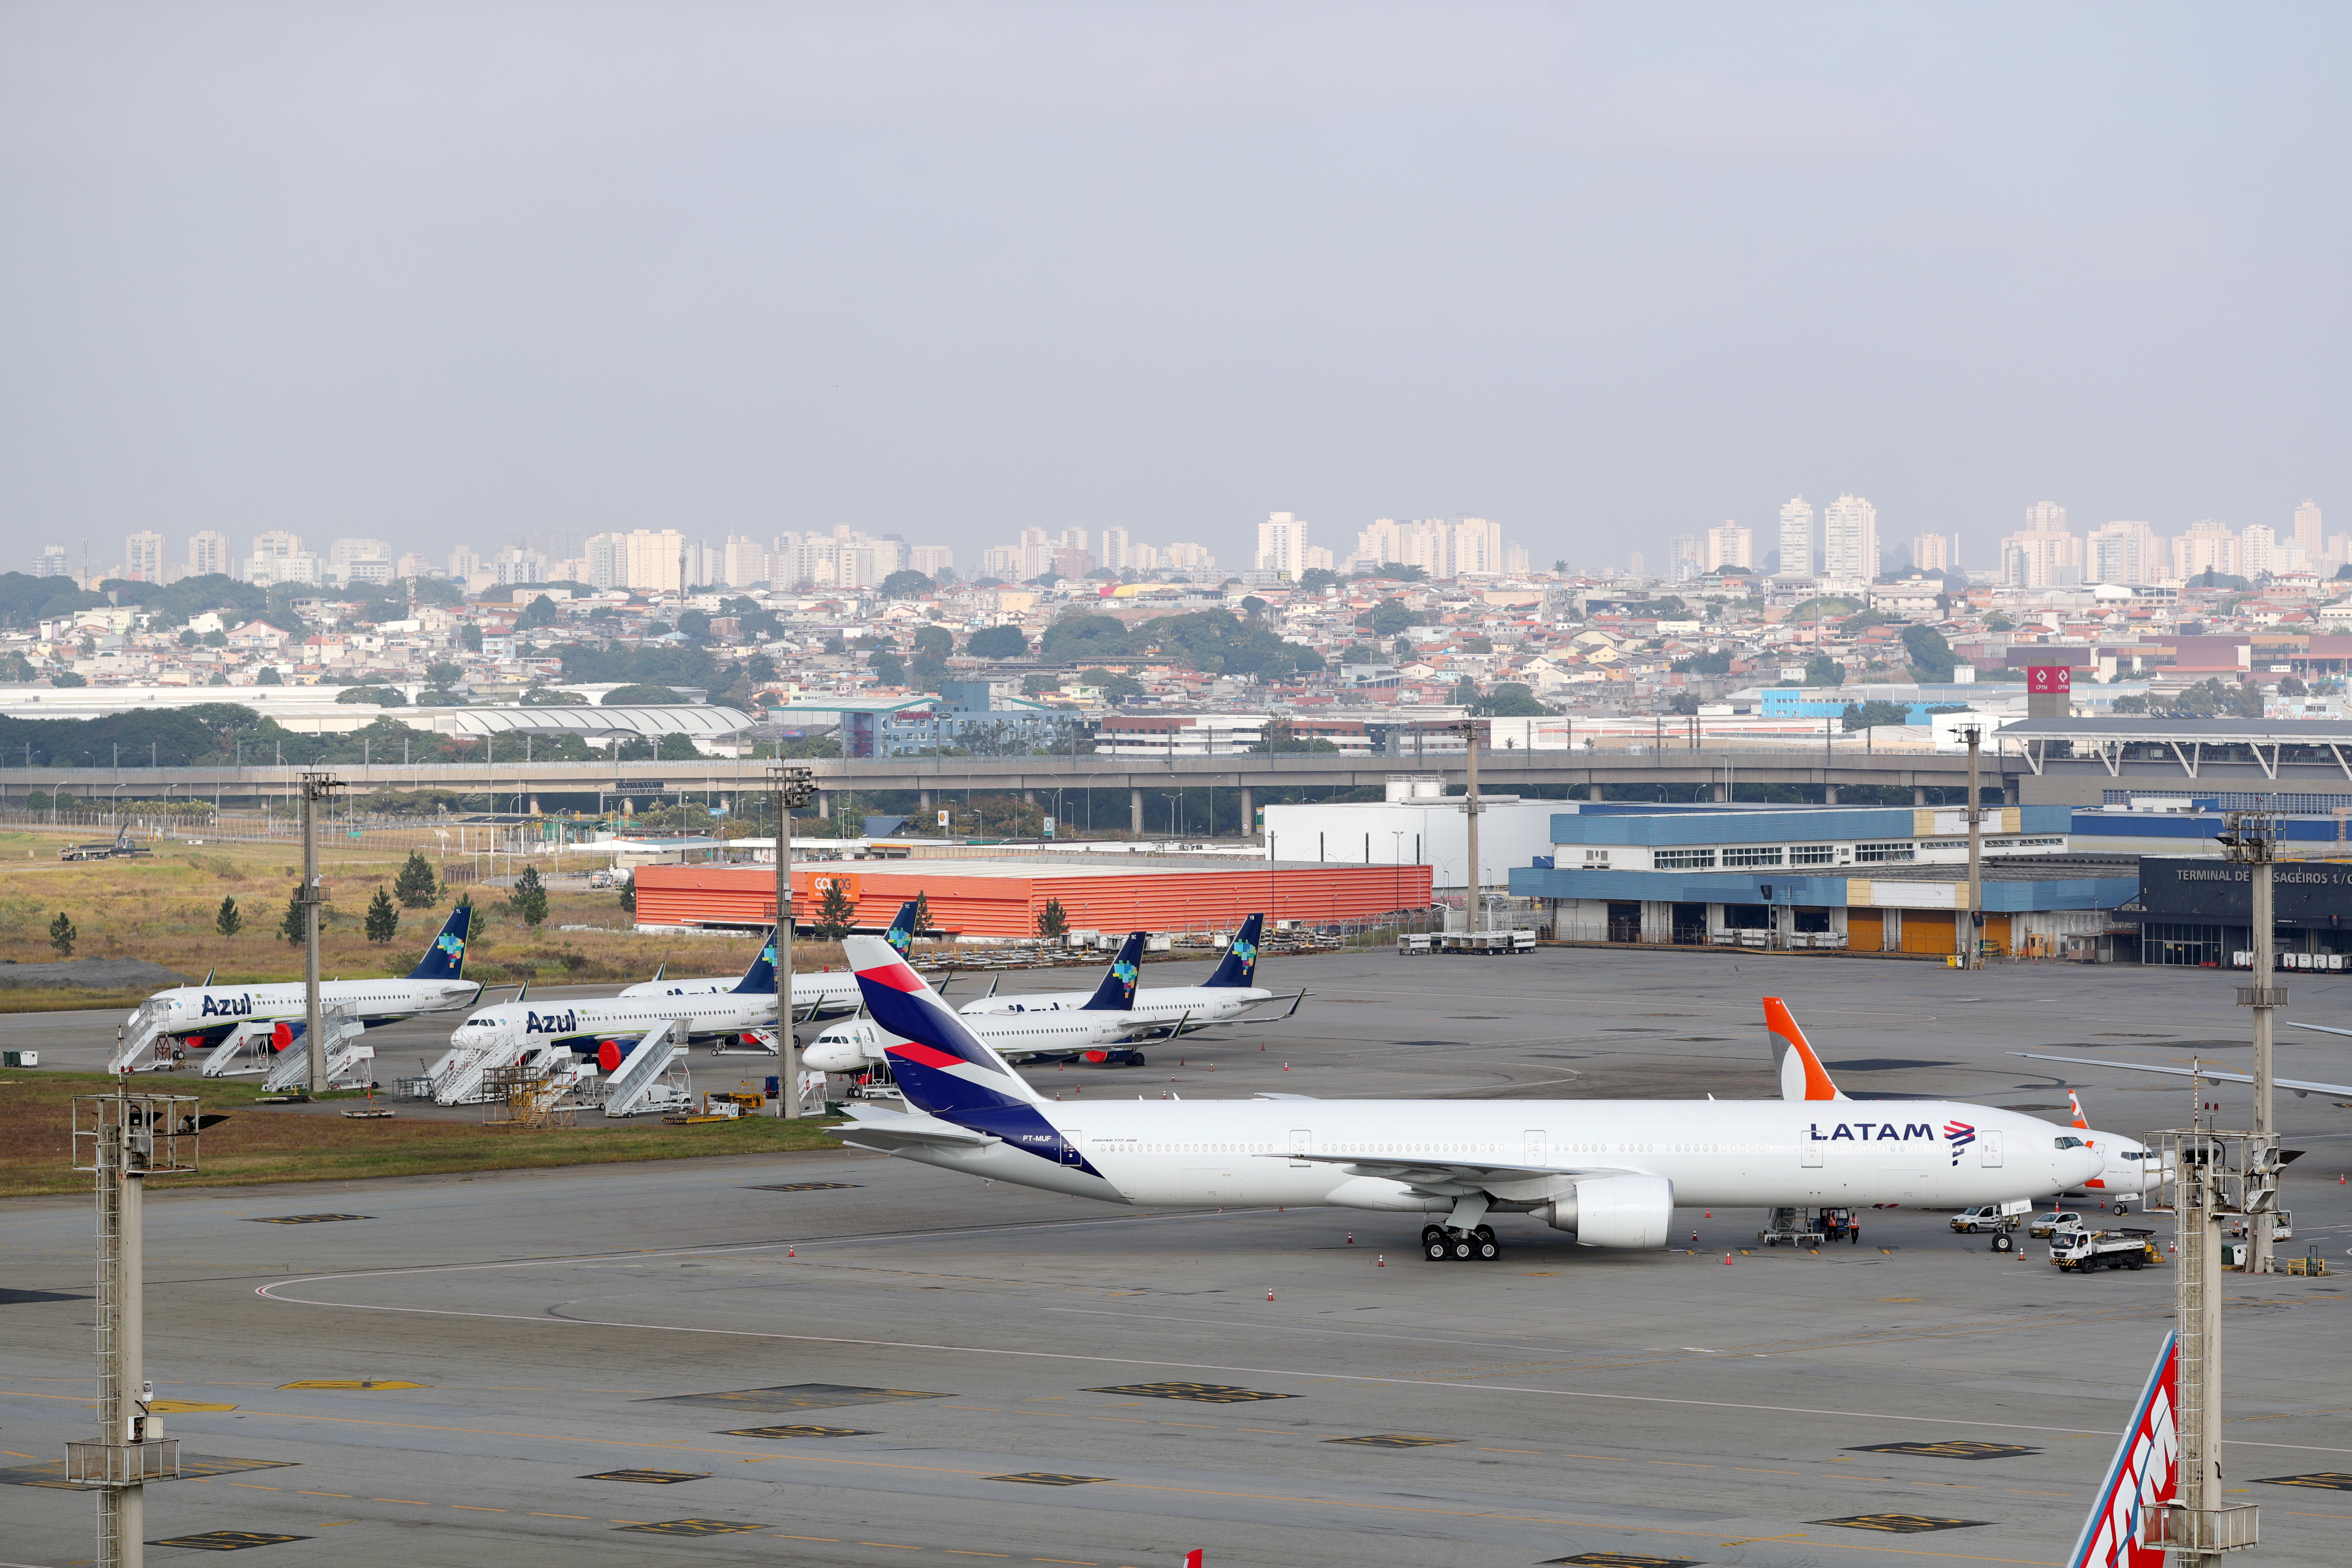 A Latam Airlines airplane is seen at Guarulhos International Airport amid the outbreak of the coronavirus disease (COVID-19), in Guarulhos, near Sao Paulo, Brazil, May 19, 2020. Picture taken May 19, 2020. REUTERS/Amanda Perobelli